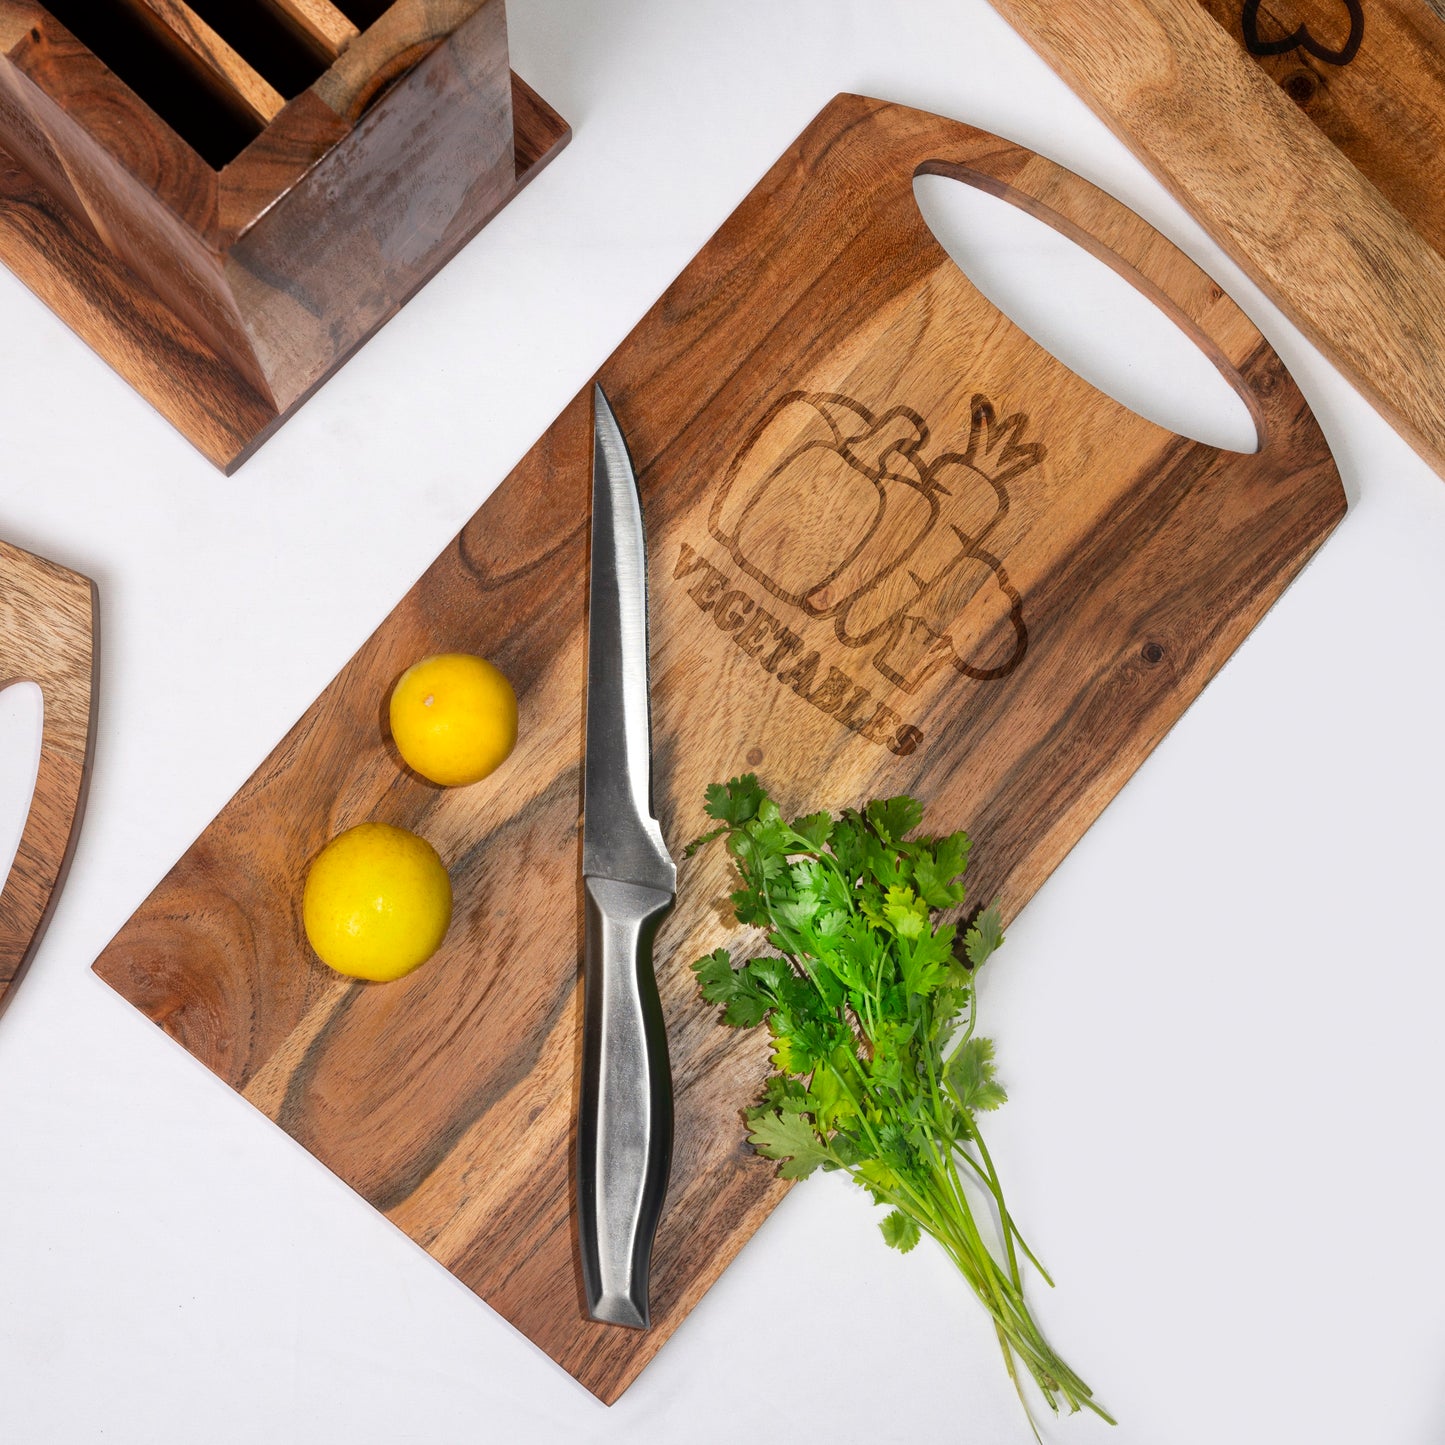 4 Piece Wooden Chopping Board Set - CBWD0001 - View 1